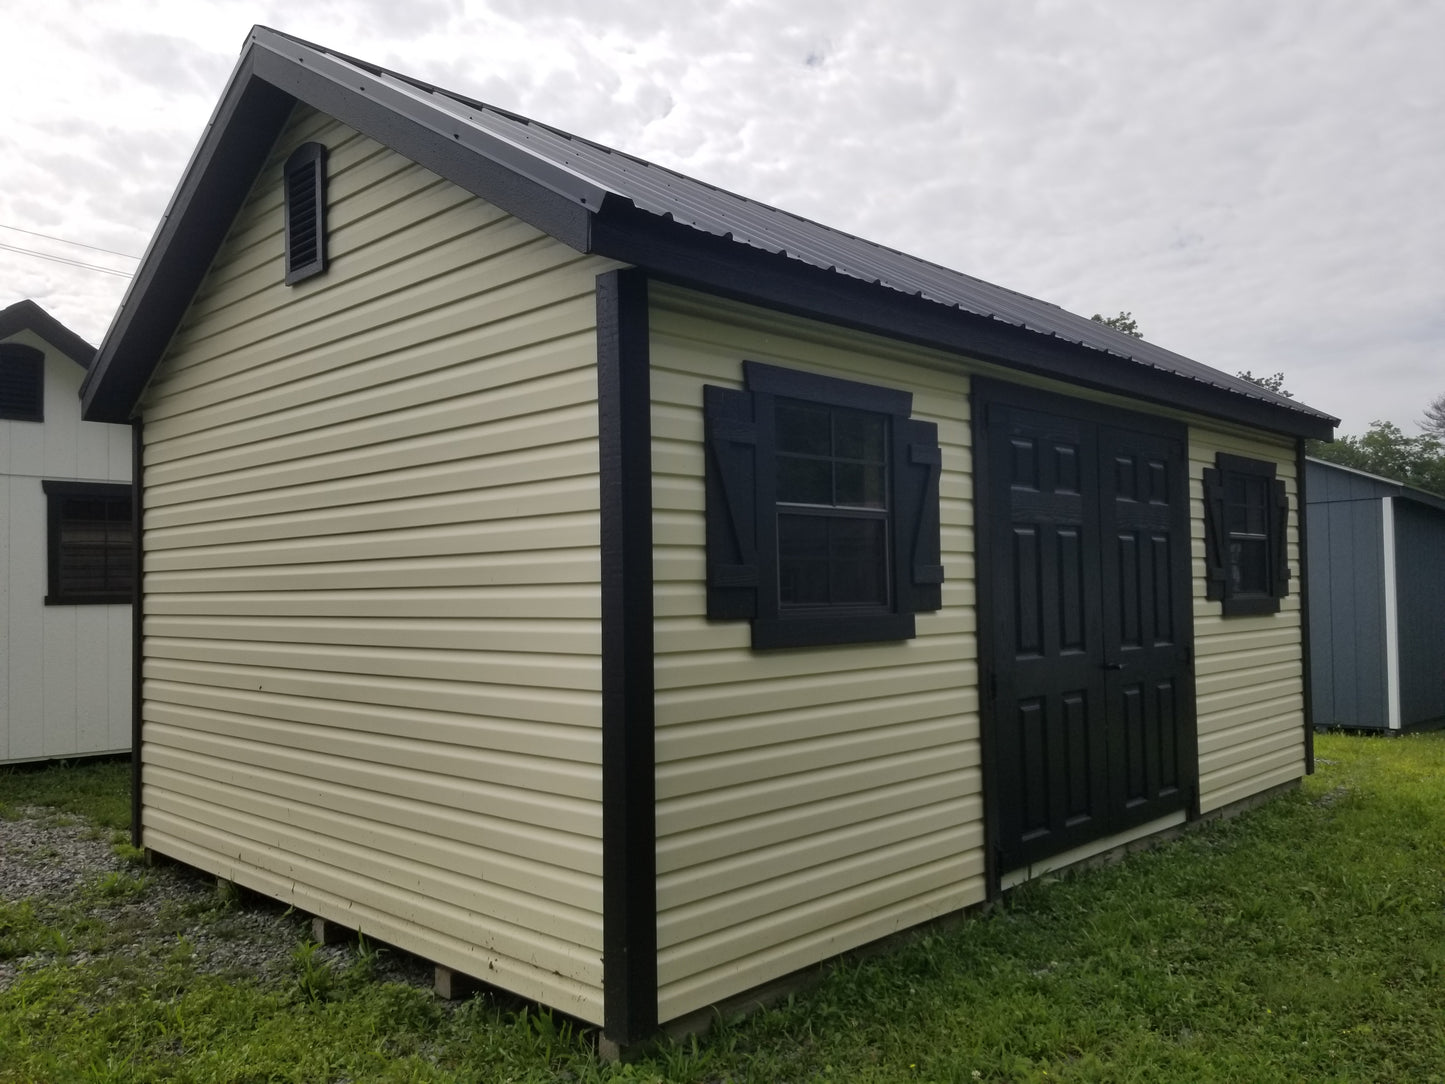 12 x 18 Garden Shed with Vinyl Siding